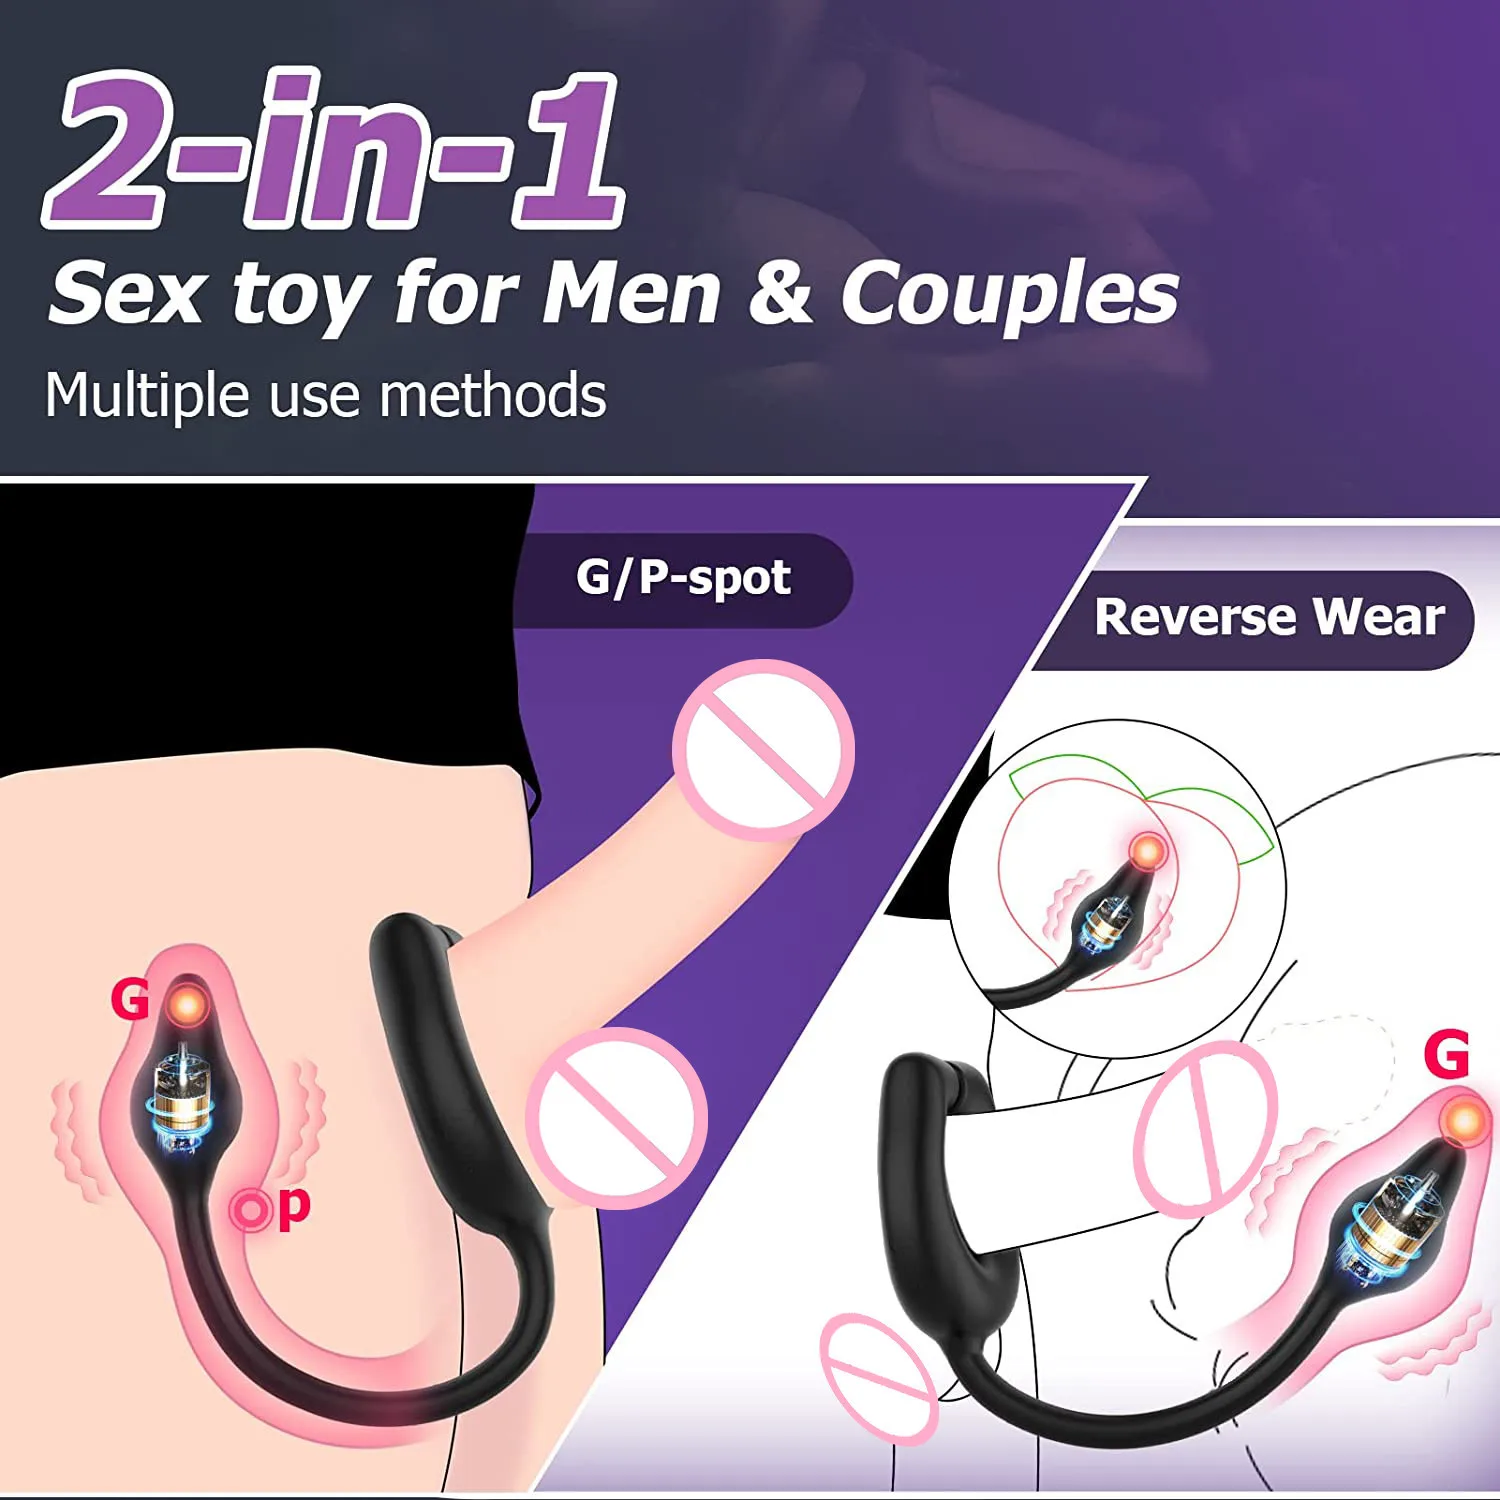 Anal Vibrator Cock Ring for Men Masturbator Penis Ring Male Delayed Ejaculation Vibrating Egg Wireless Prostate Massager Sex Toy Distributors S70b574f9ccd7424abcffe945e2de07cco